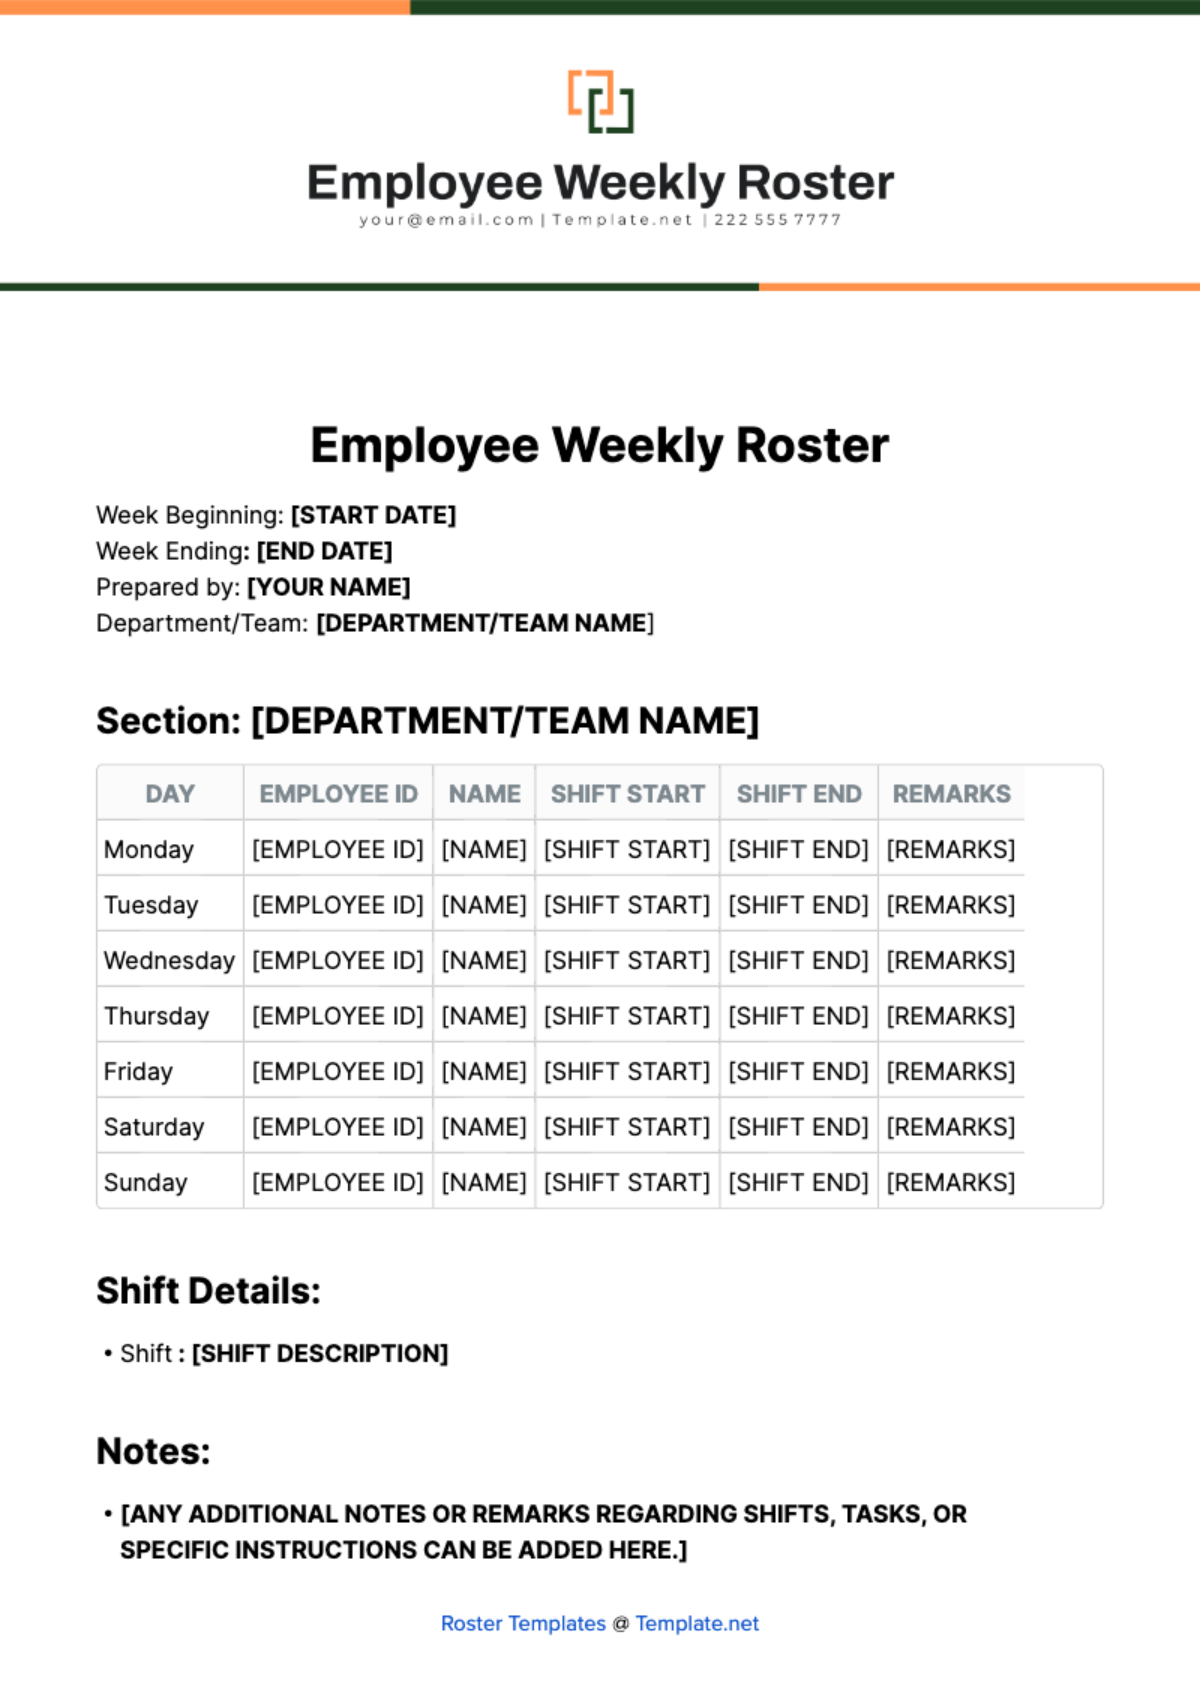 Employee Weekly Roster Template